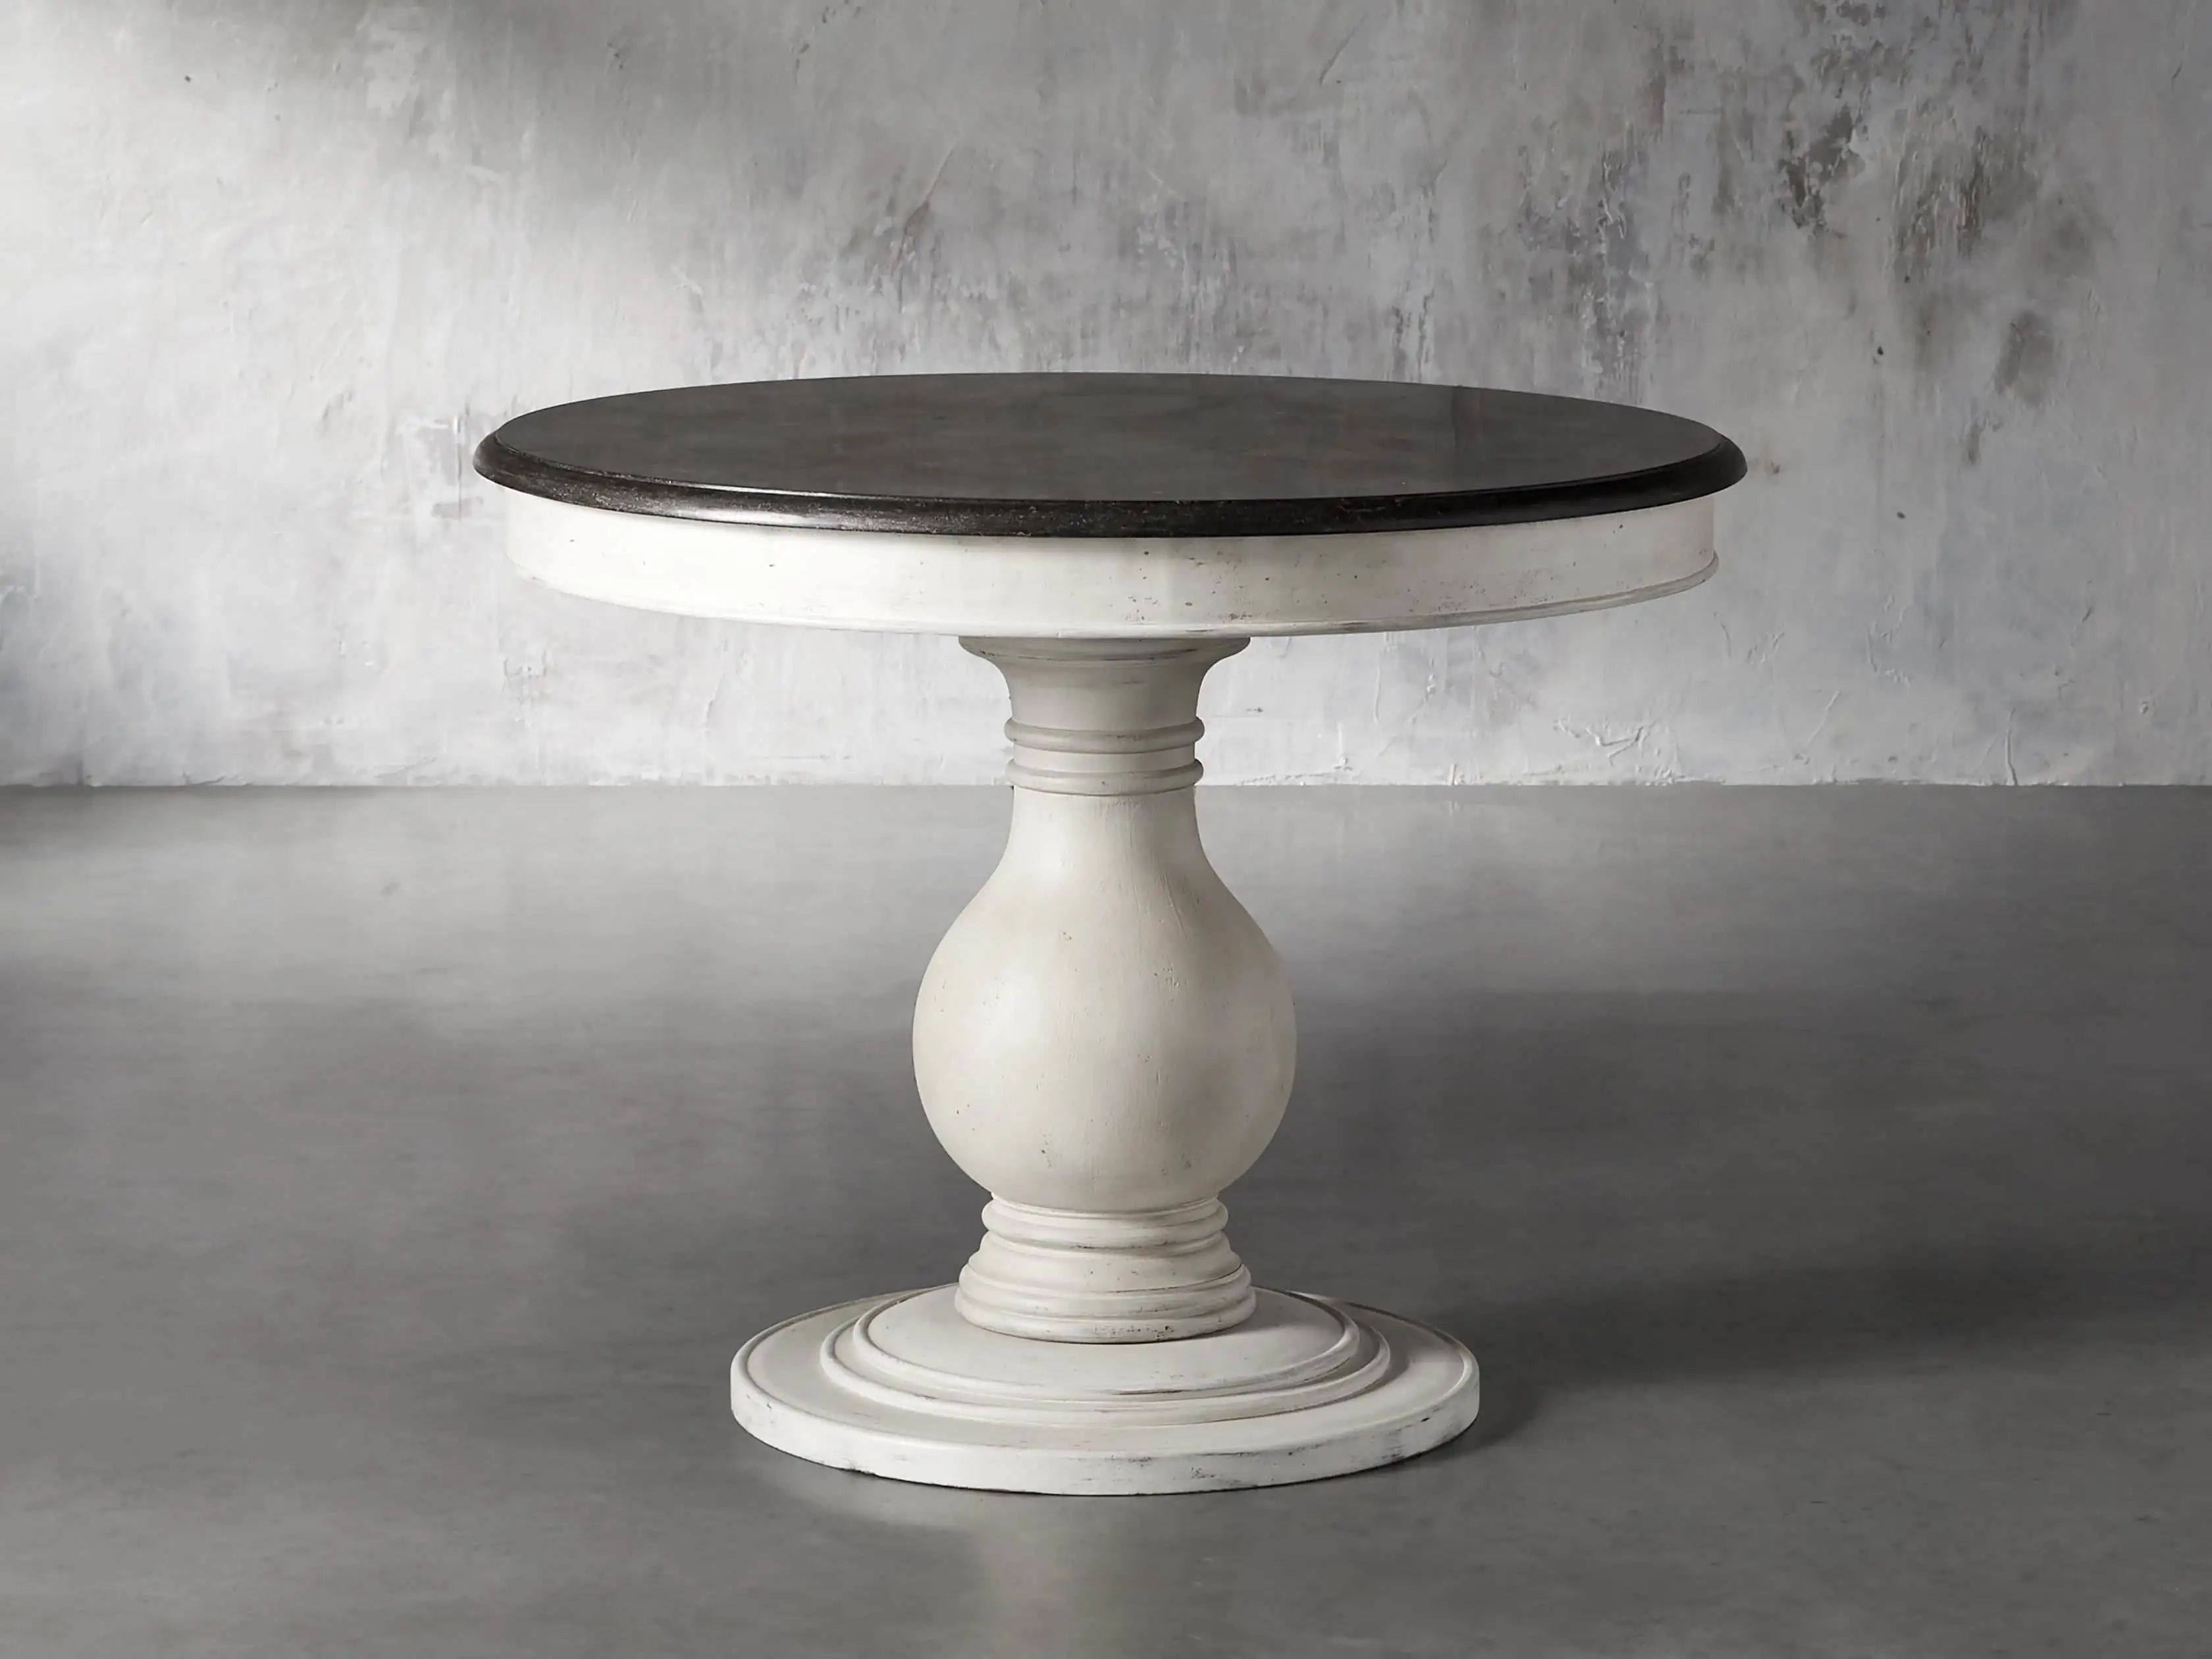 Luca 39"" Round Pedestal Dining Table With Bluestone Top In Rustic White | Arhaus